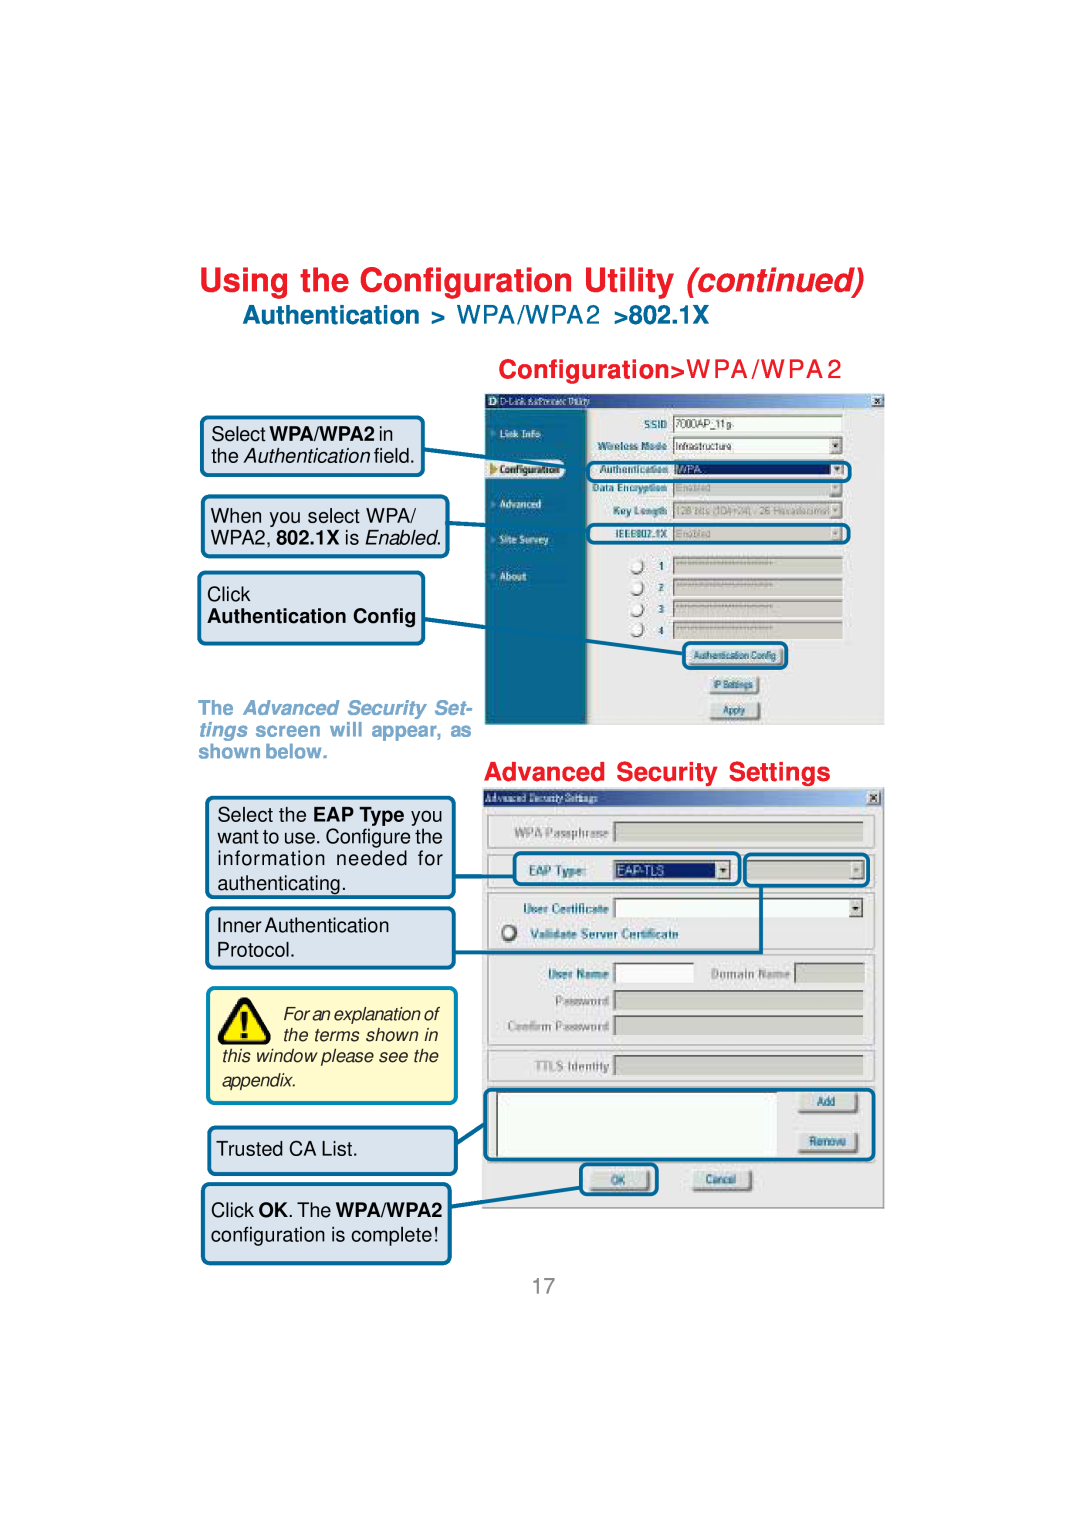 D-Link DWL-AG530 manual Authentication WPA/WPA2, ConfigurationWPA/WPA2 Advanced Security Settings, Authentication Config 